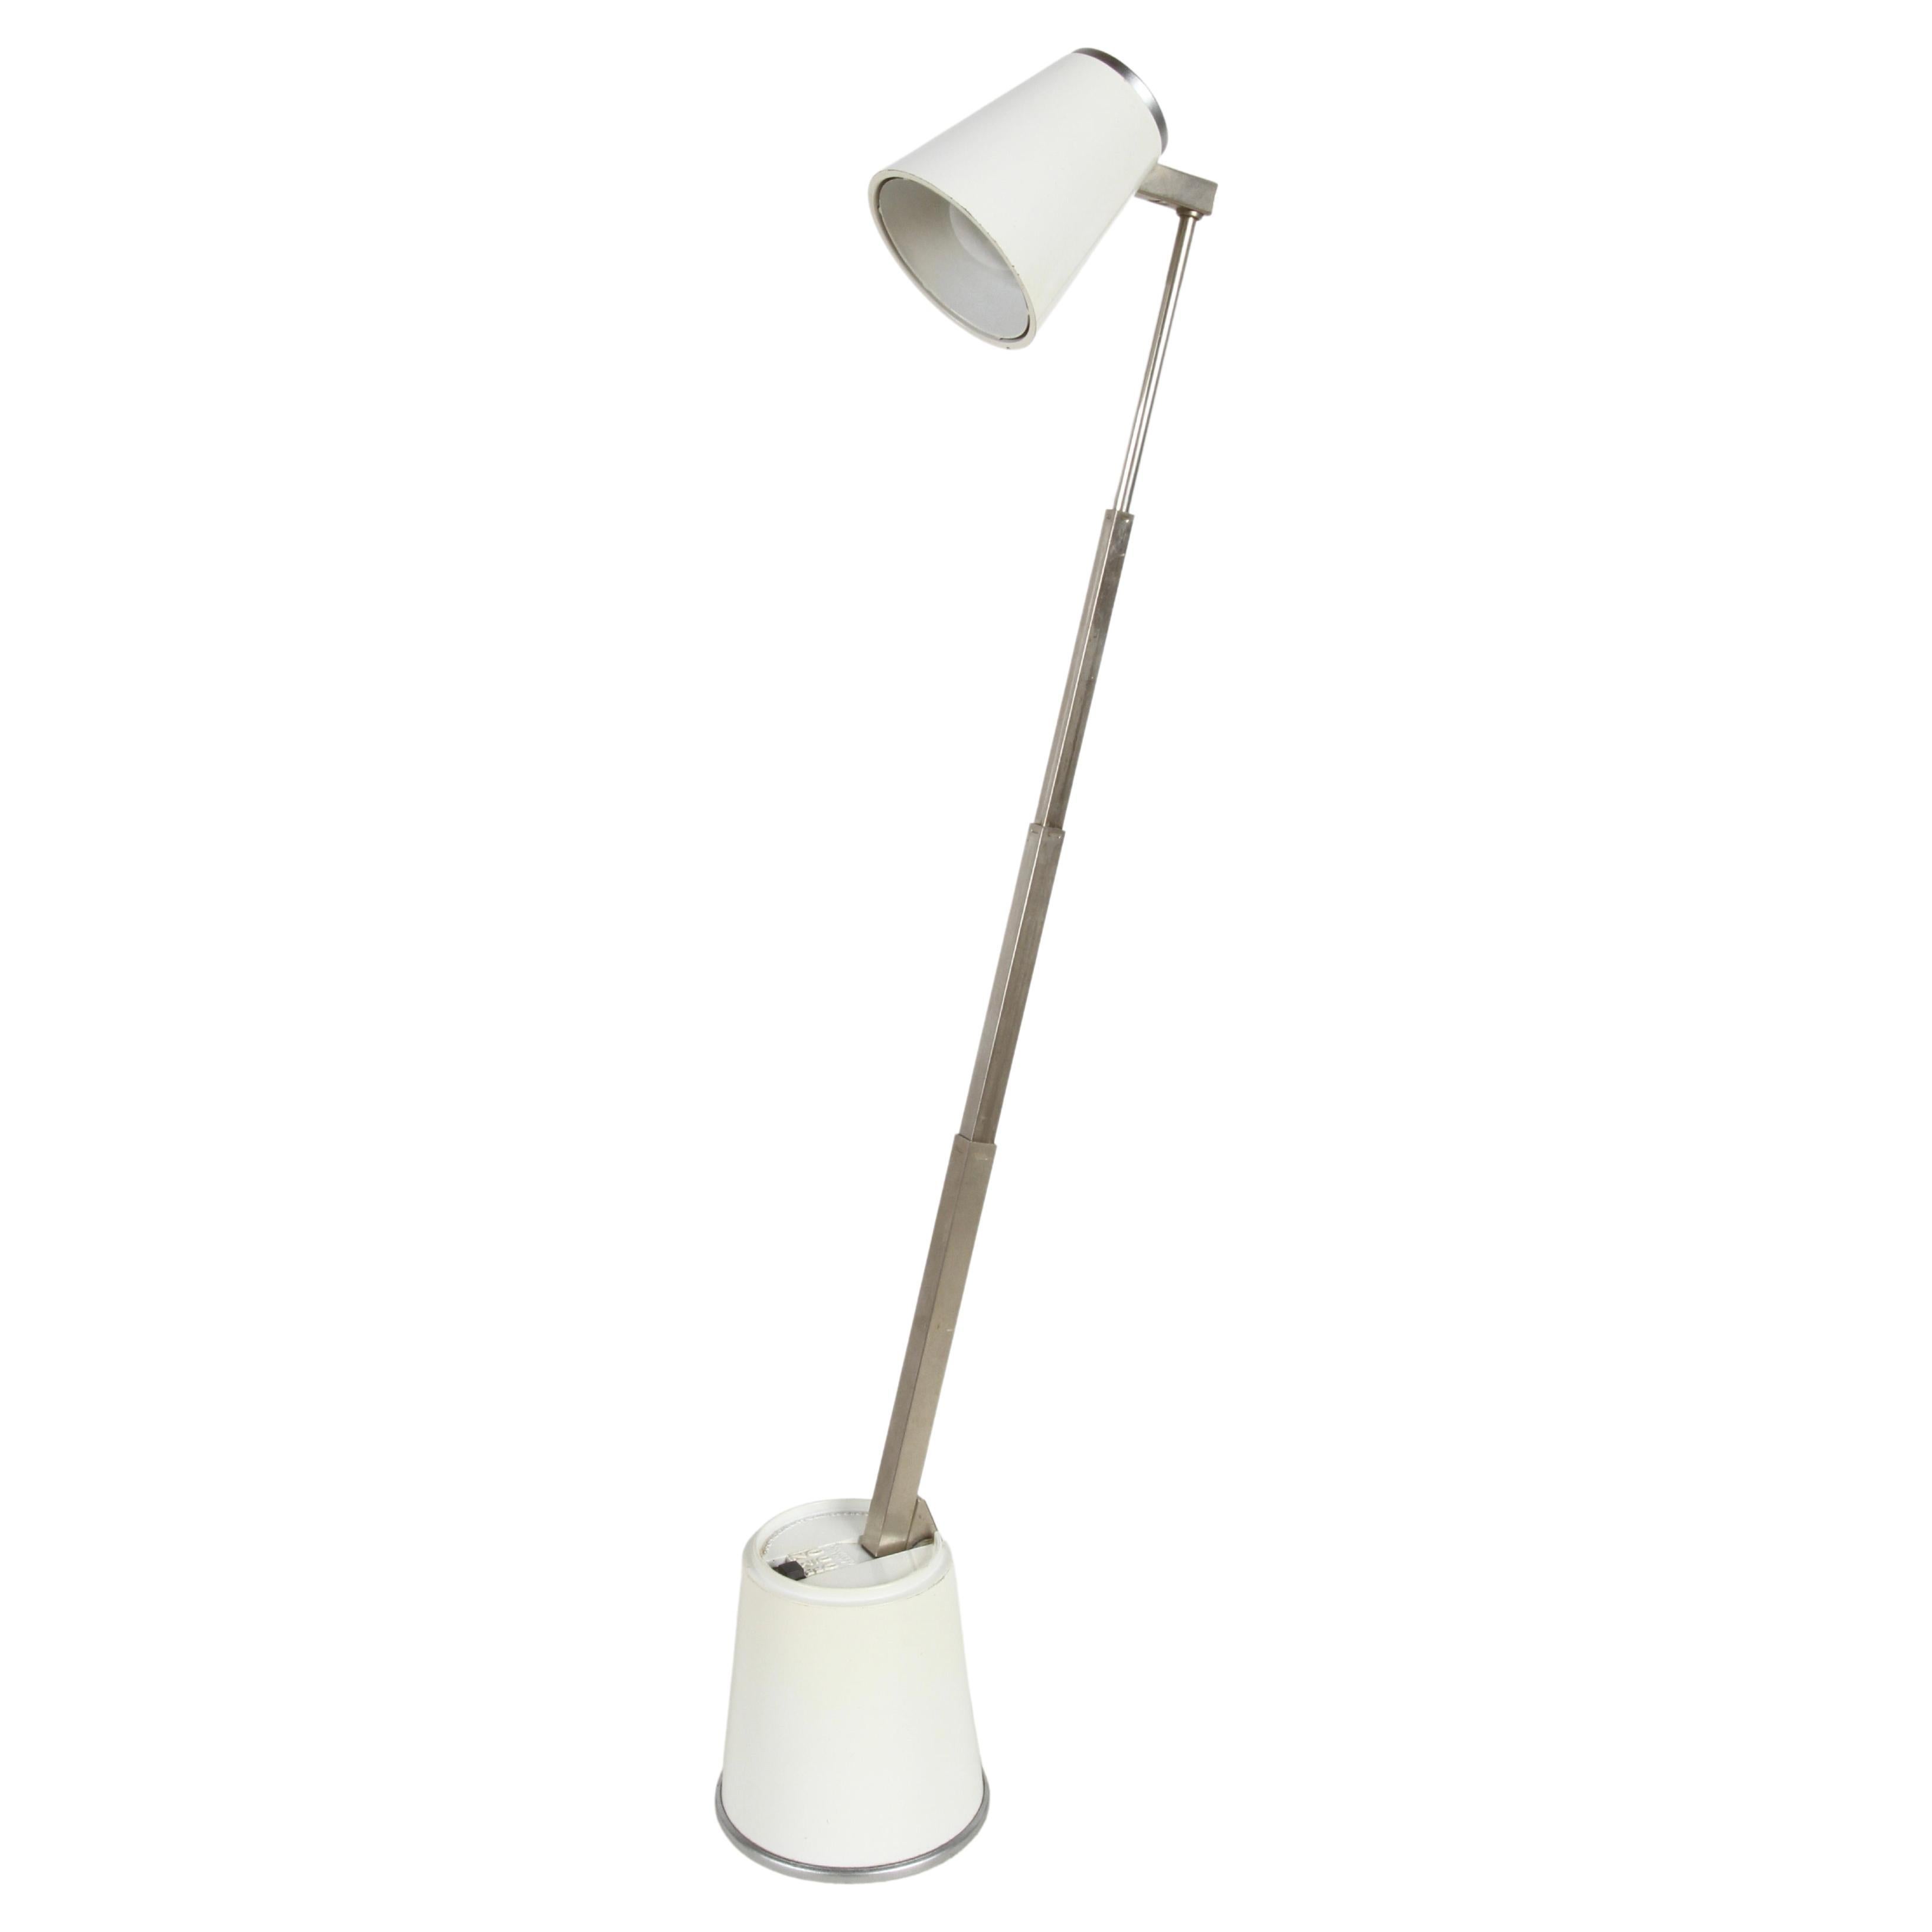 1960s White Compact "Lampette" Telescopic Table - Desk Lamp by Eichhoff Germany